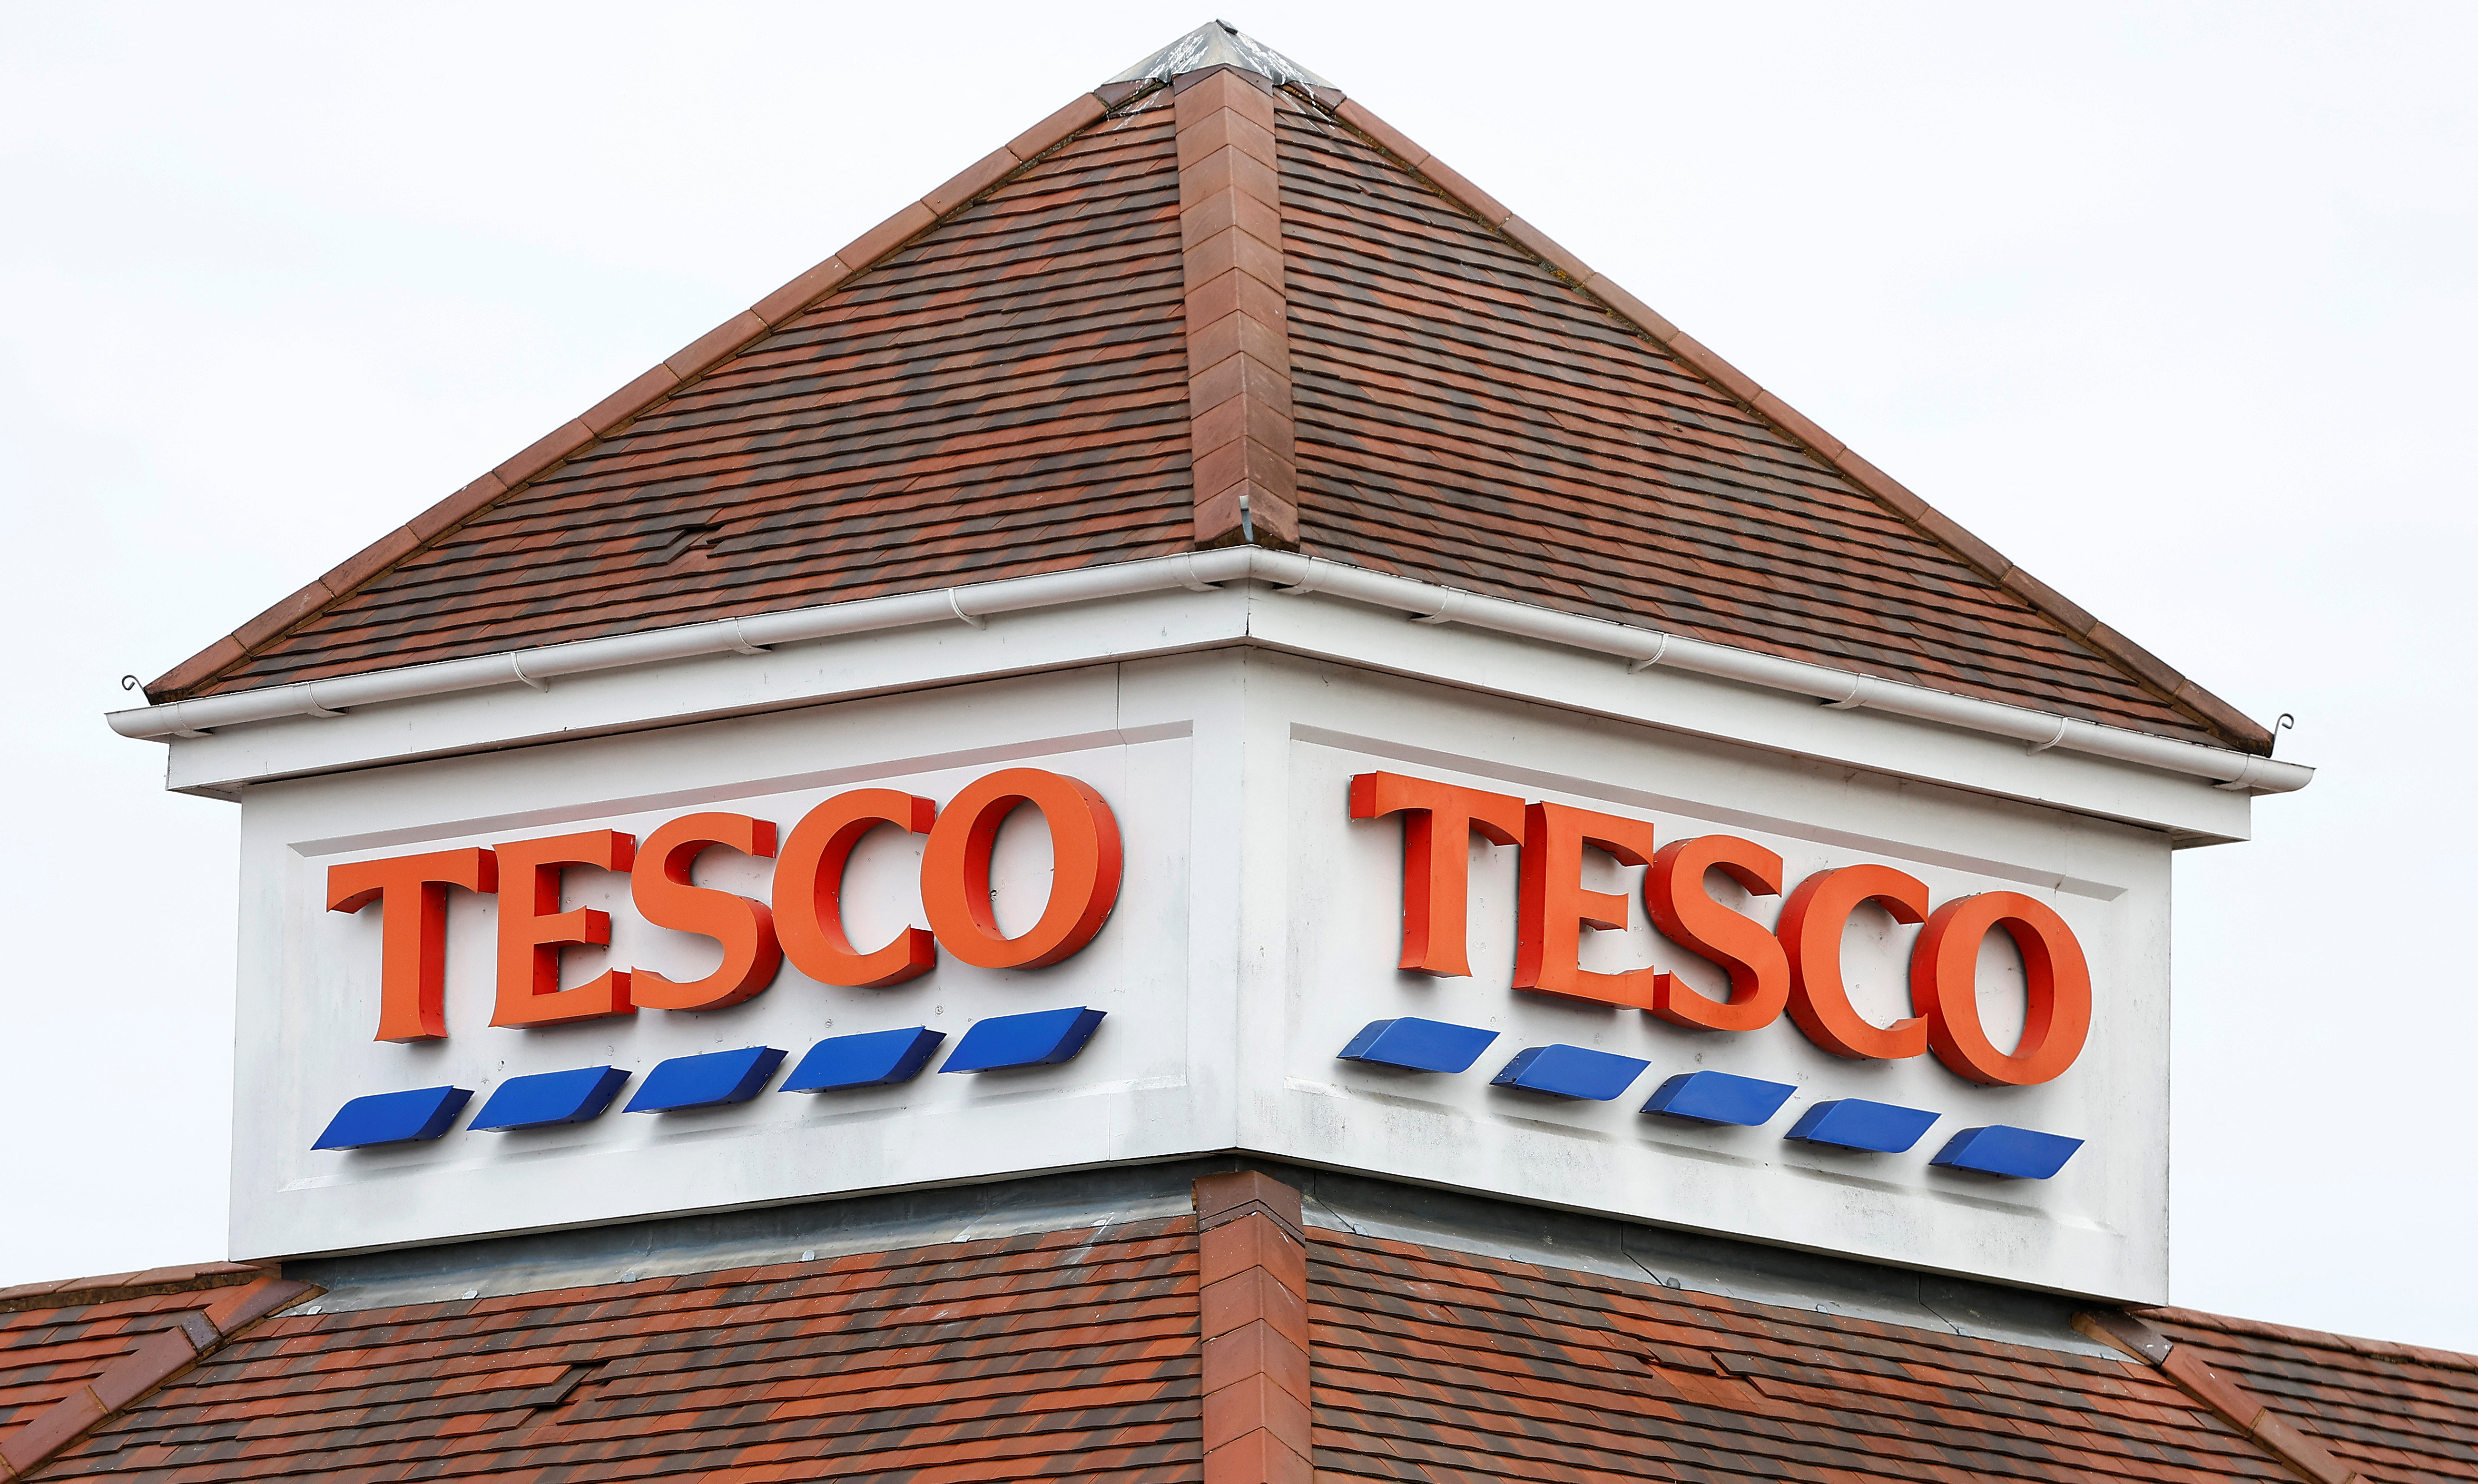 A TESCO sign is seen at a store in Weybridge